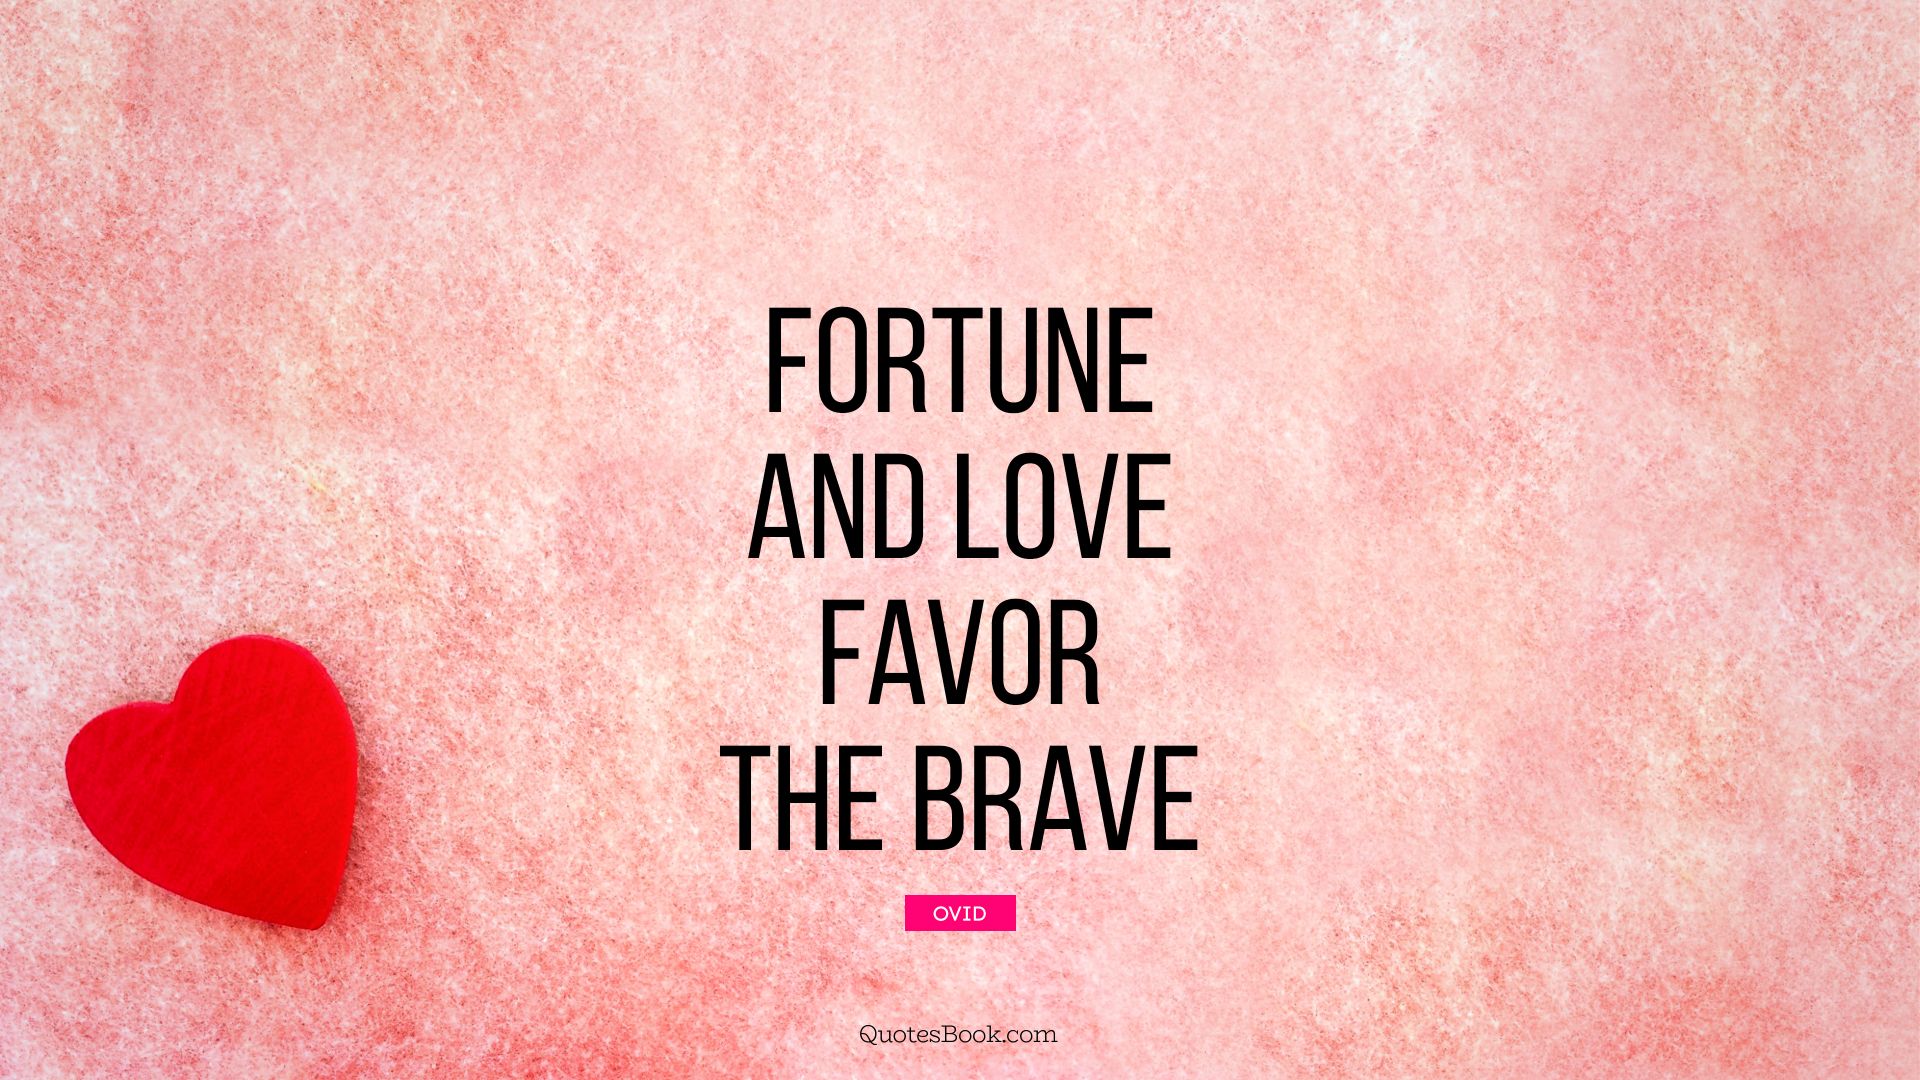 Fortune and love favor the brave. - Quote by Ovid